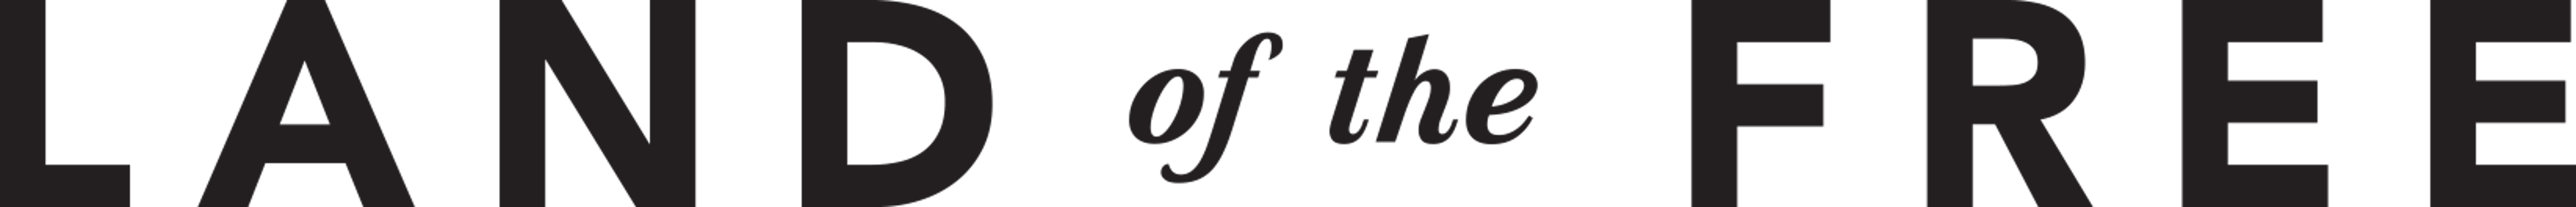 Coty_Consumer-Brands_Land-of-the-Free_Logo.png